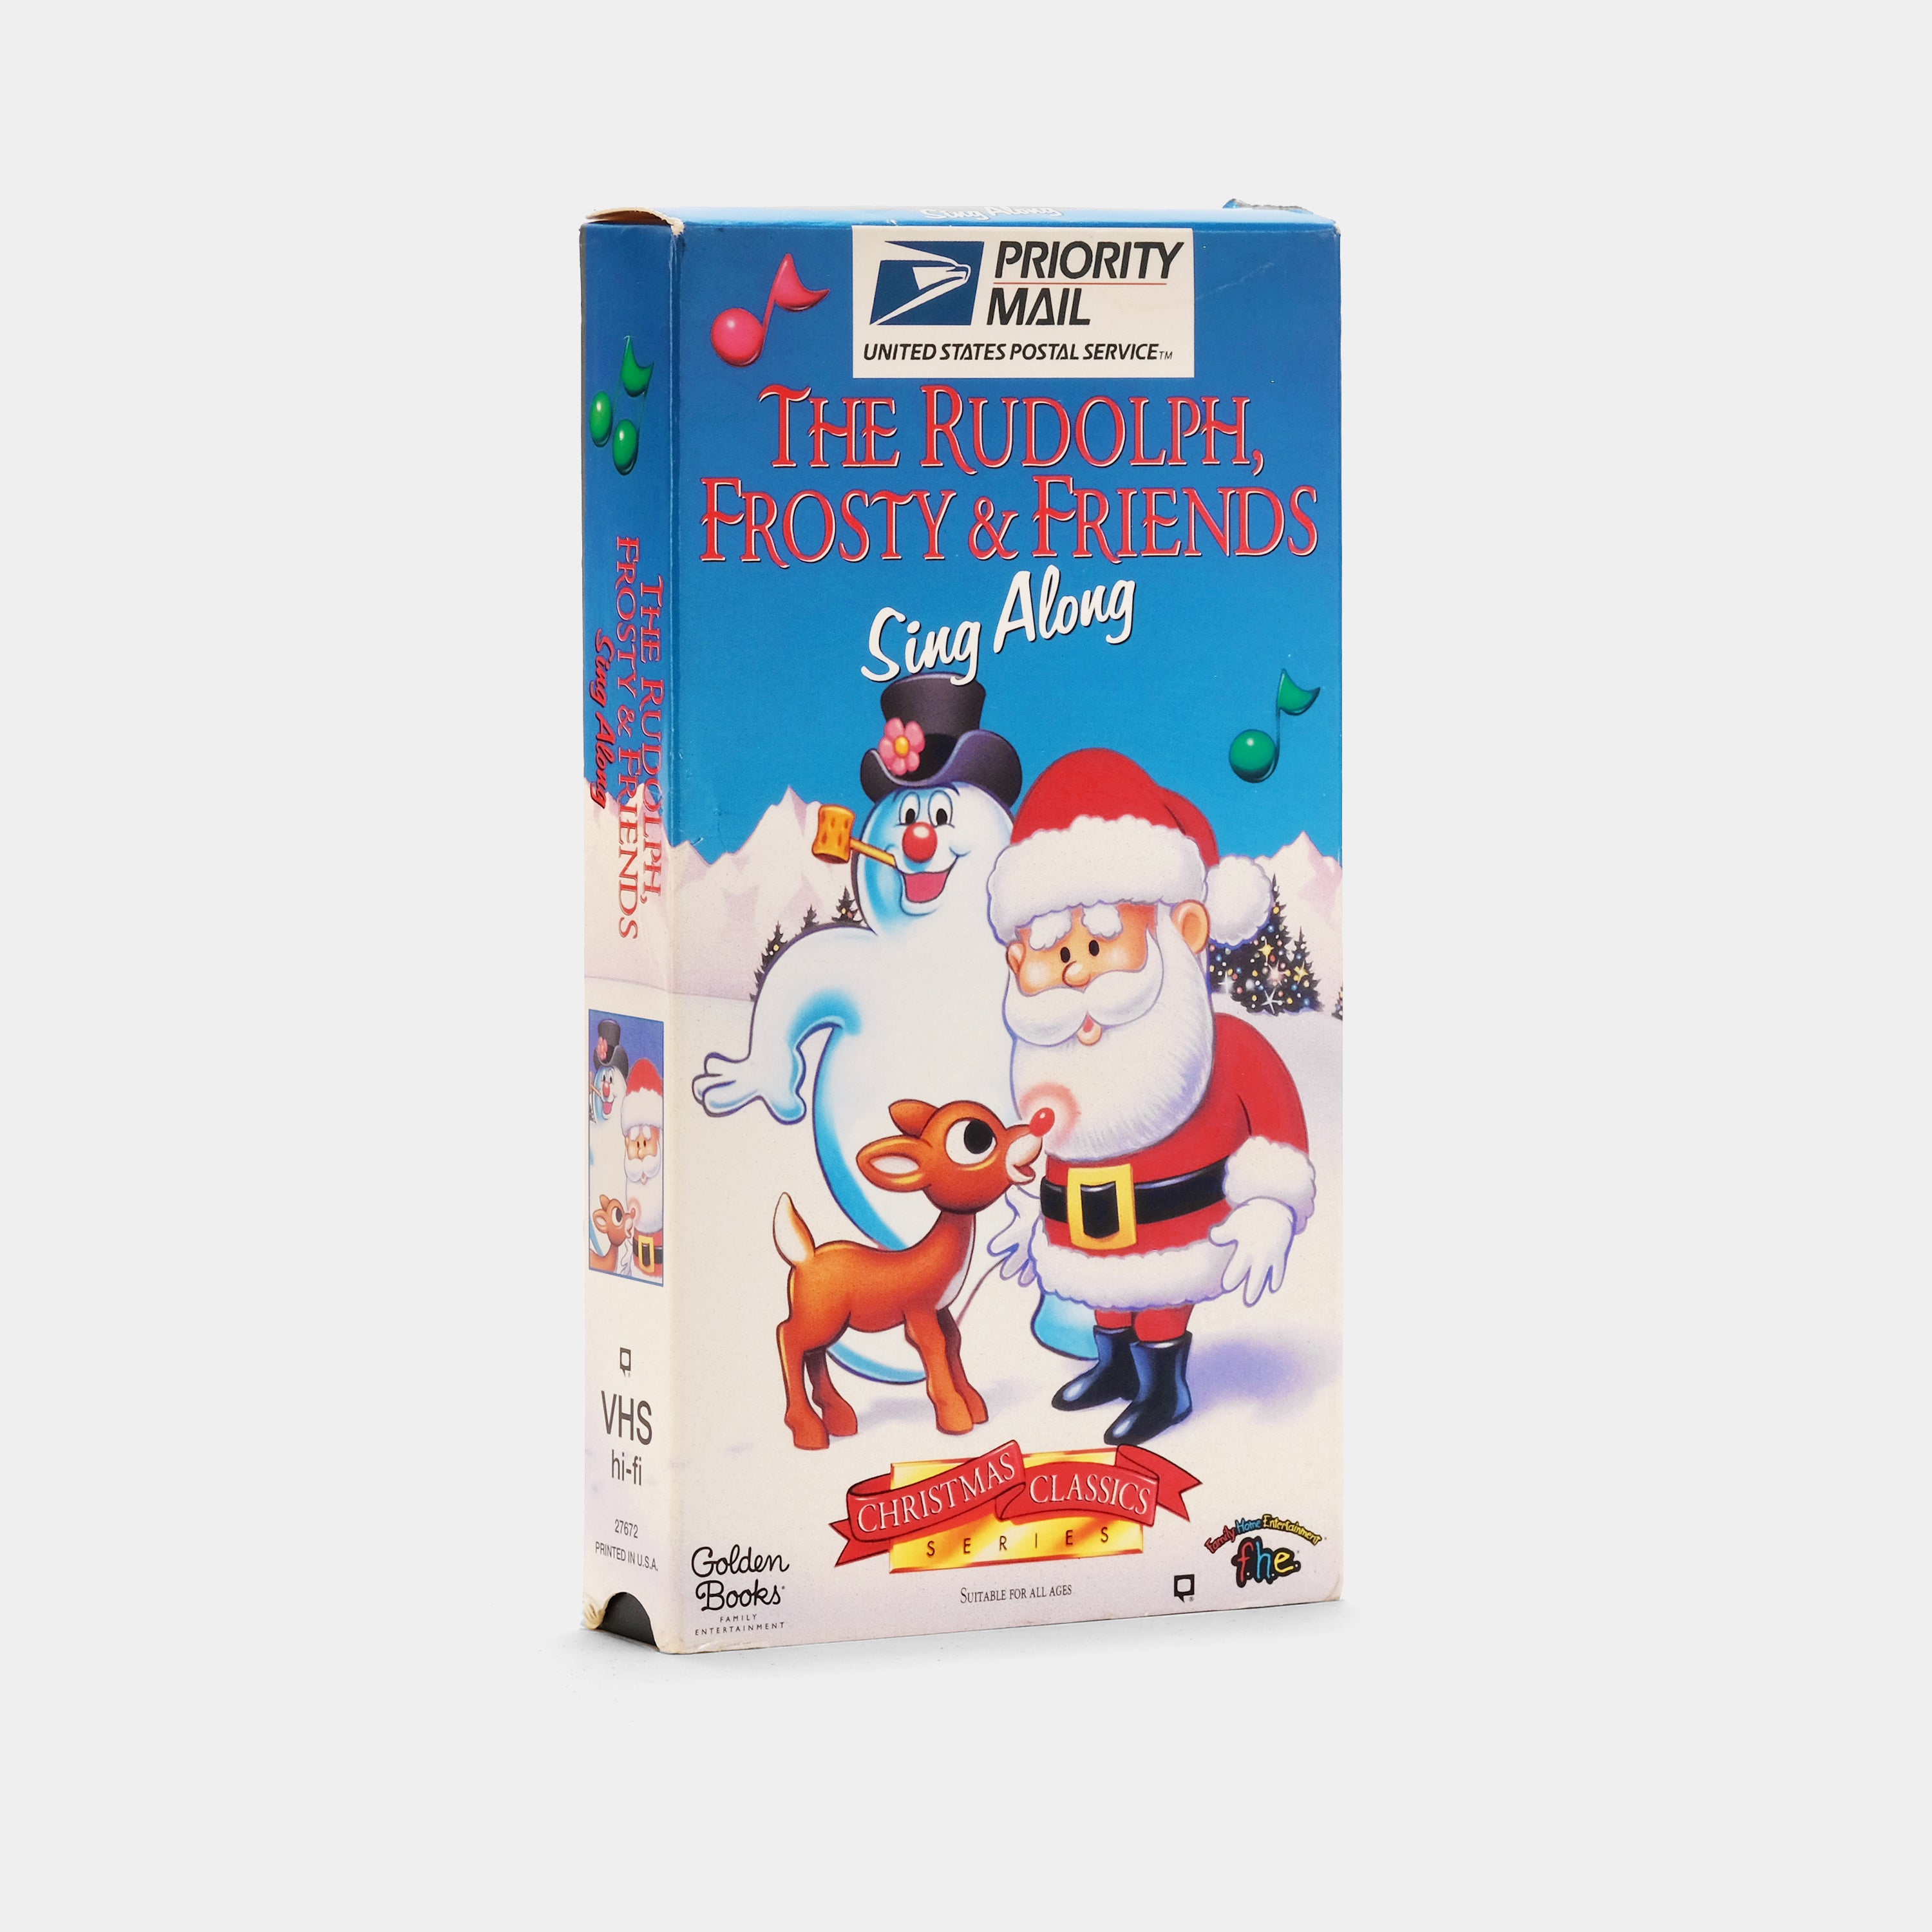 The Rudolph, Frosty & Friends Sing Along VHS Tape